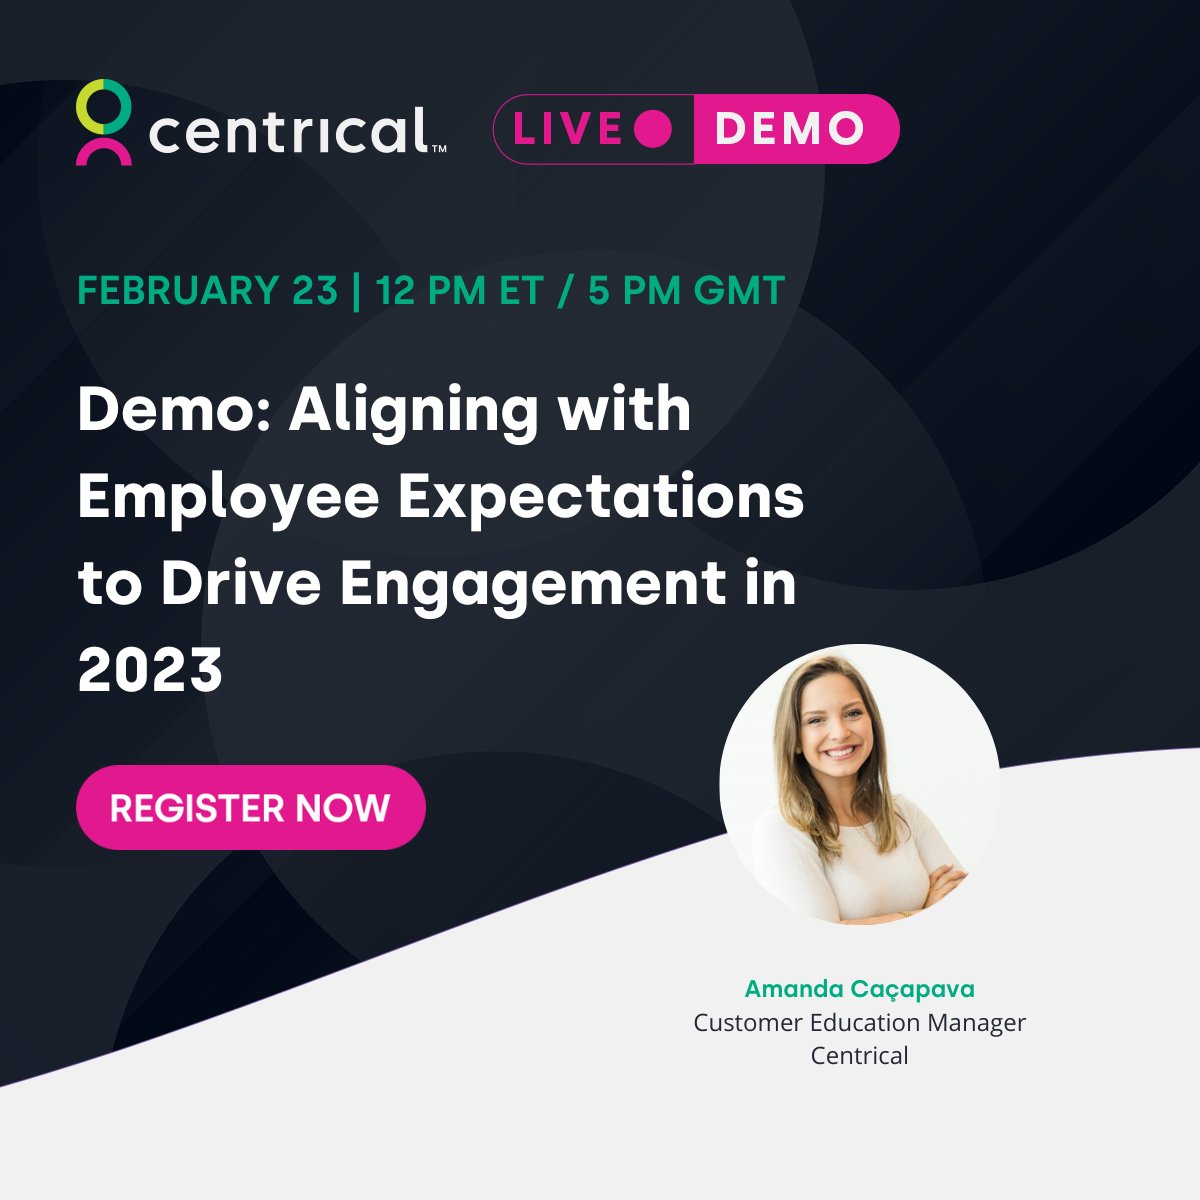 Join us on Feb. 23 to learn how organizations are aligning w/ modern employee expectations to successfully lead tomorrow’s #frontlineteams. Register now: centrical.com/events/demo-al… #operationsleaders #EX #CX